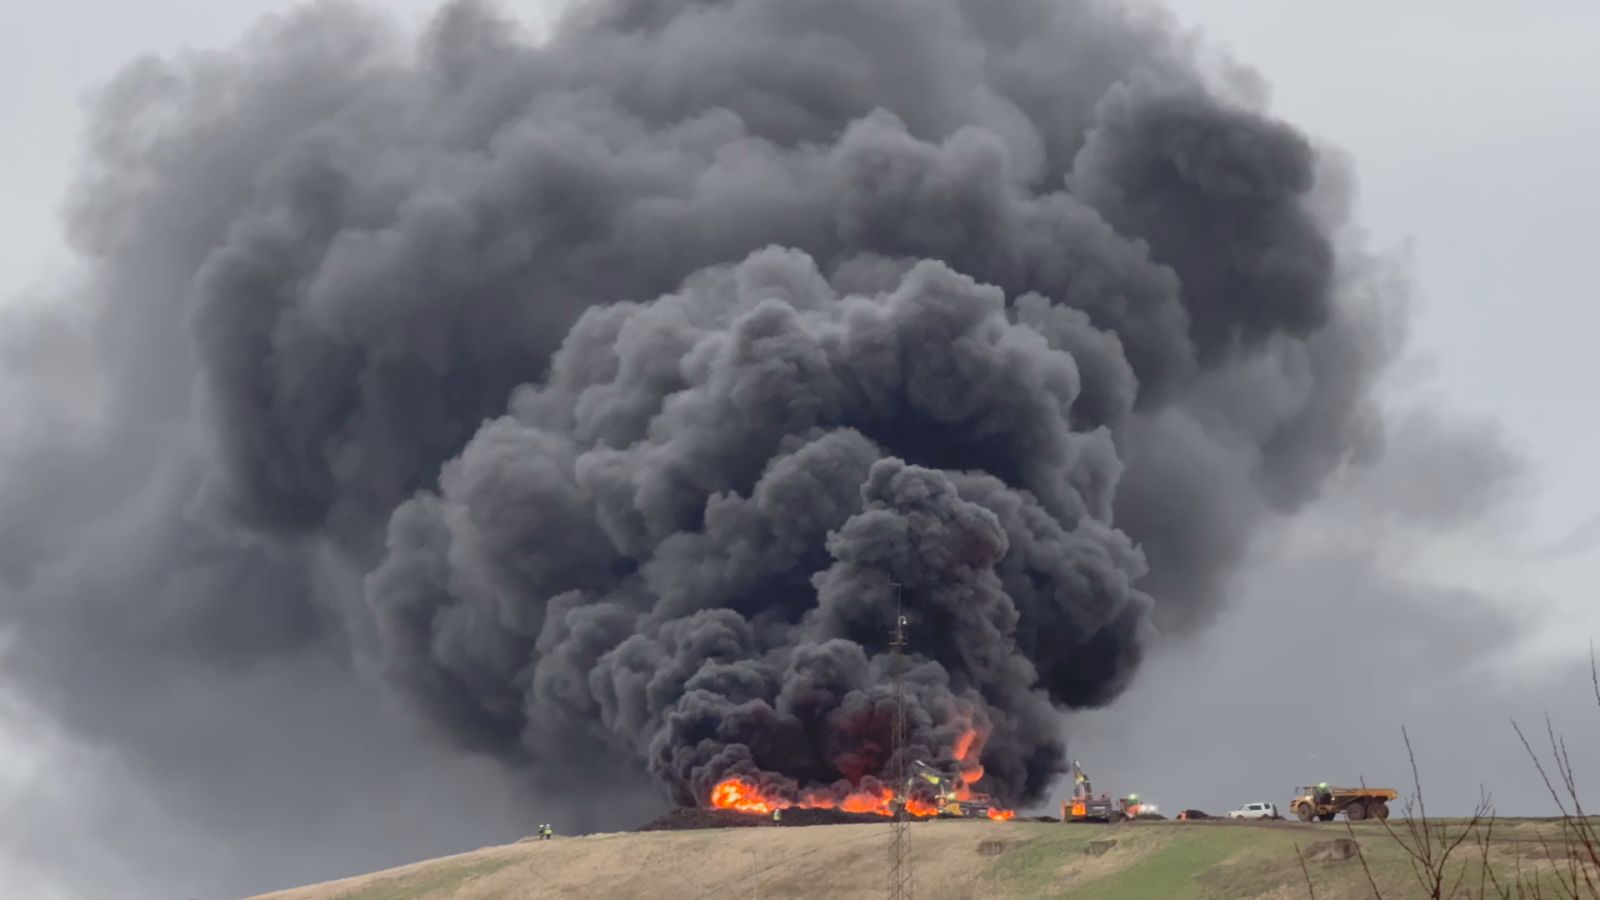 Trains, guns, lightning and cigarettes blamed for wildfires